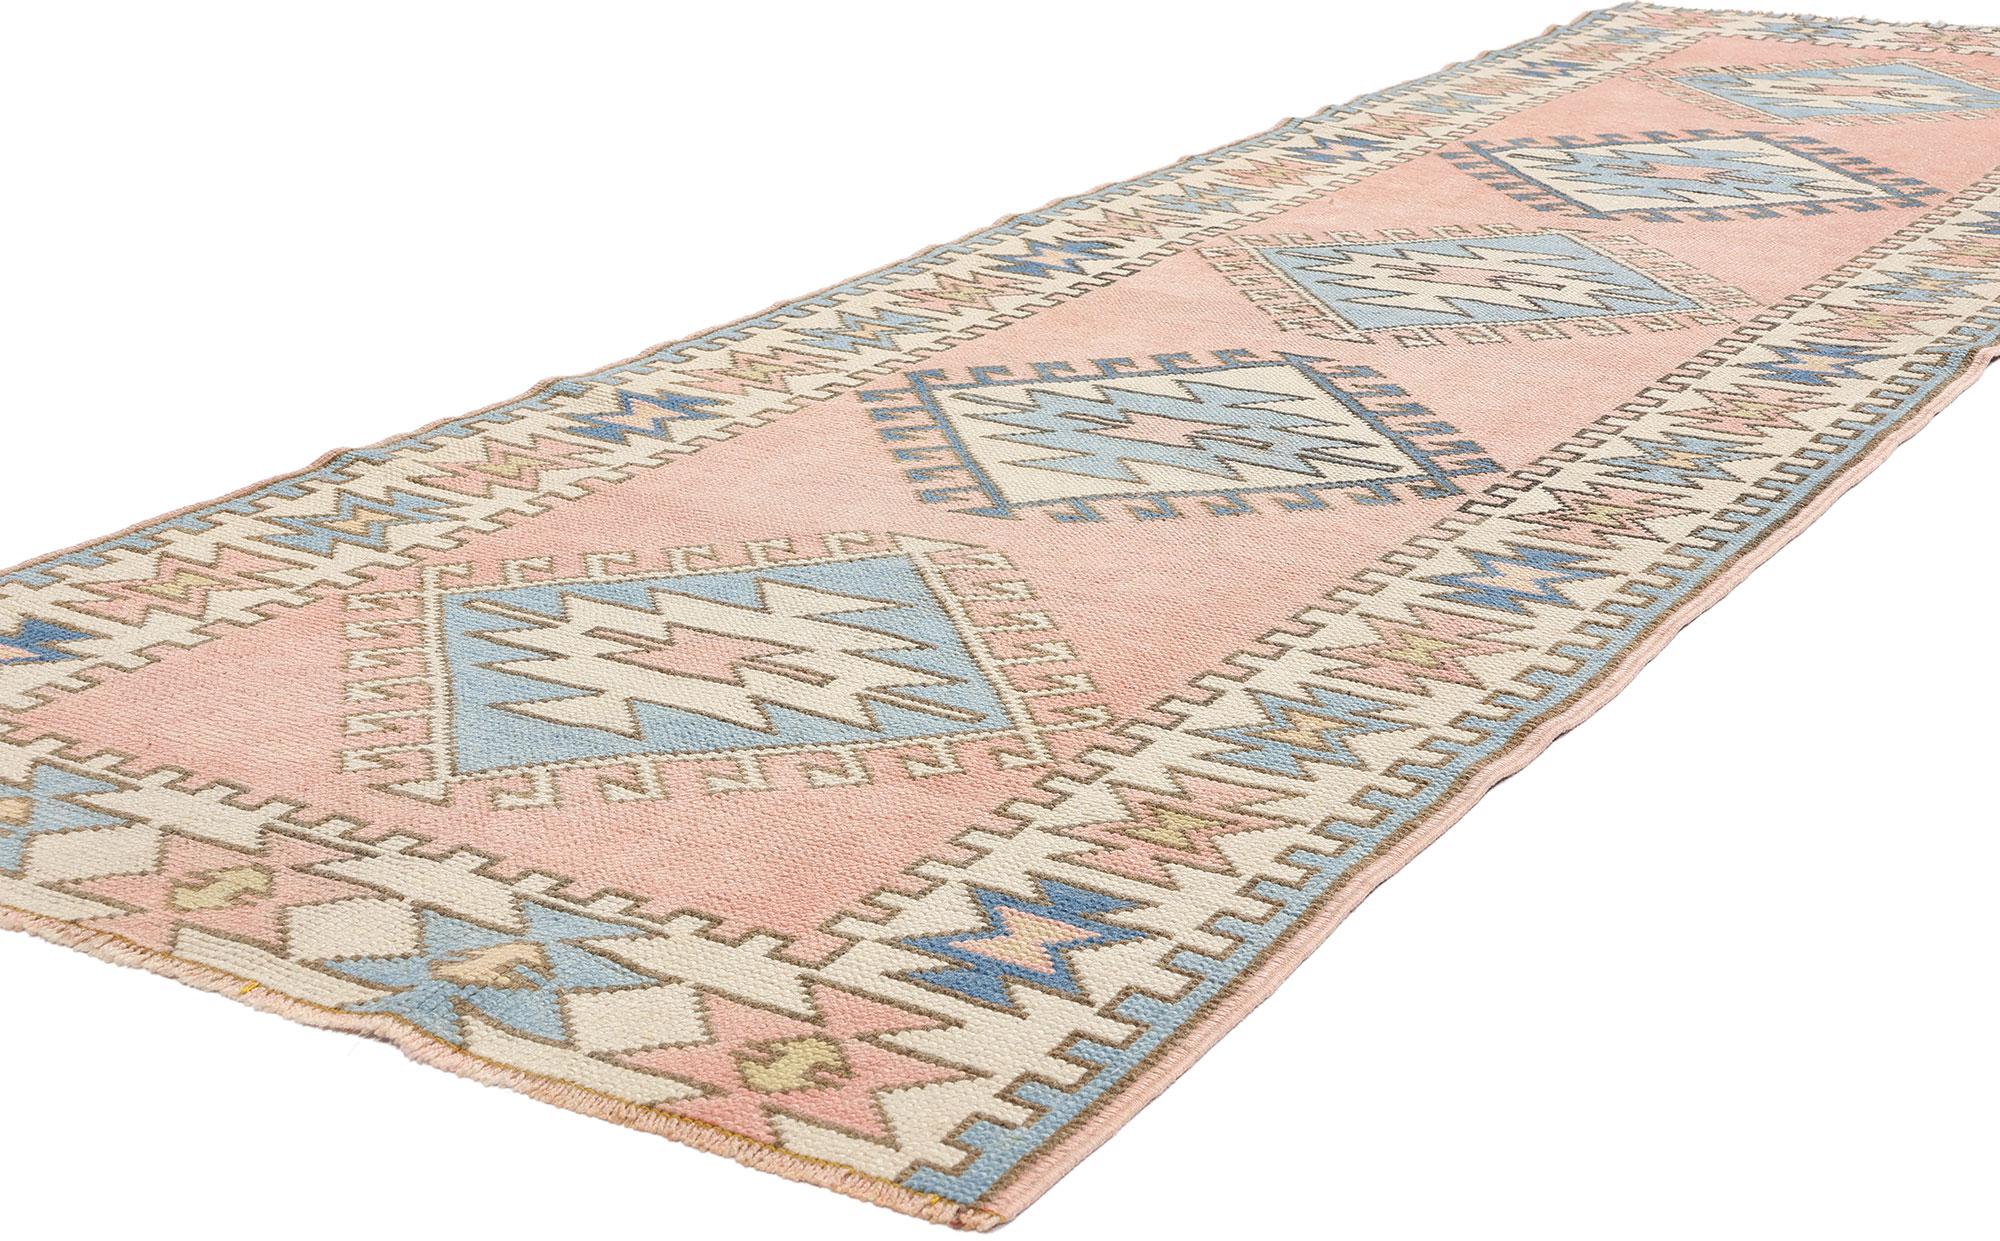 53928 Vintage Pink Turkish Oushak Rug Runner, 02'11 x 09'09. Turkish Oushak carpet runners, originating from the Oushak region in western Turkey, are celebrated for their elaborate designs showcasing expansive geometric patterns and soothing color